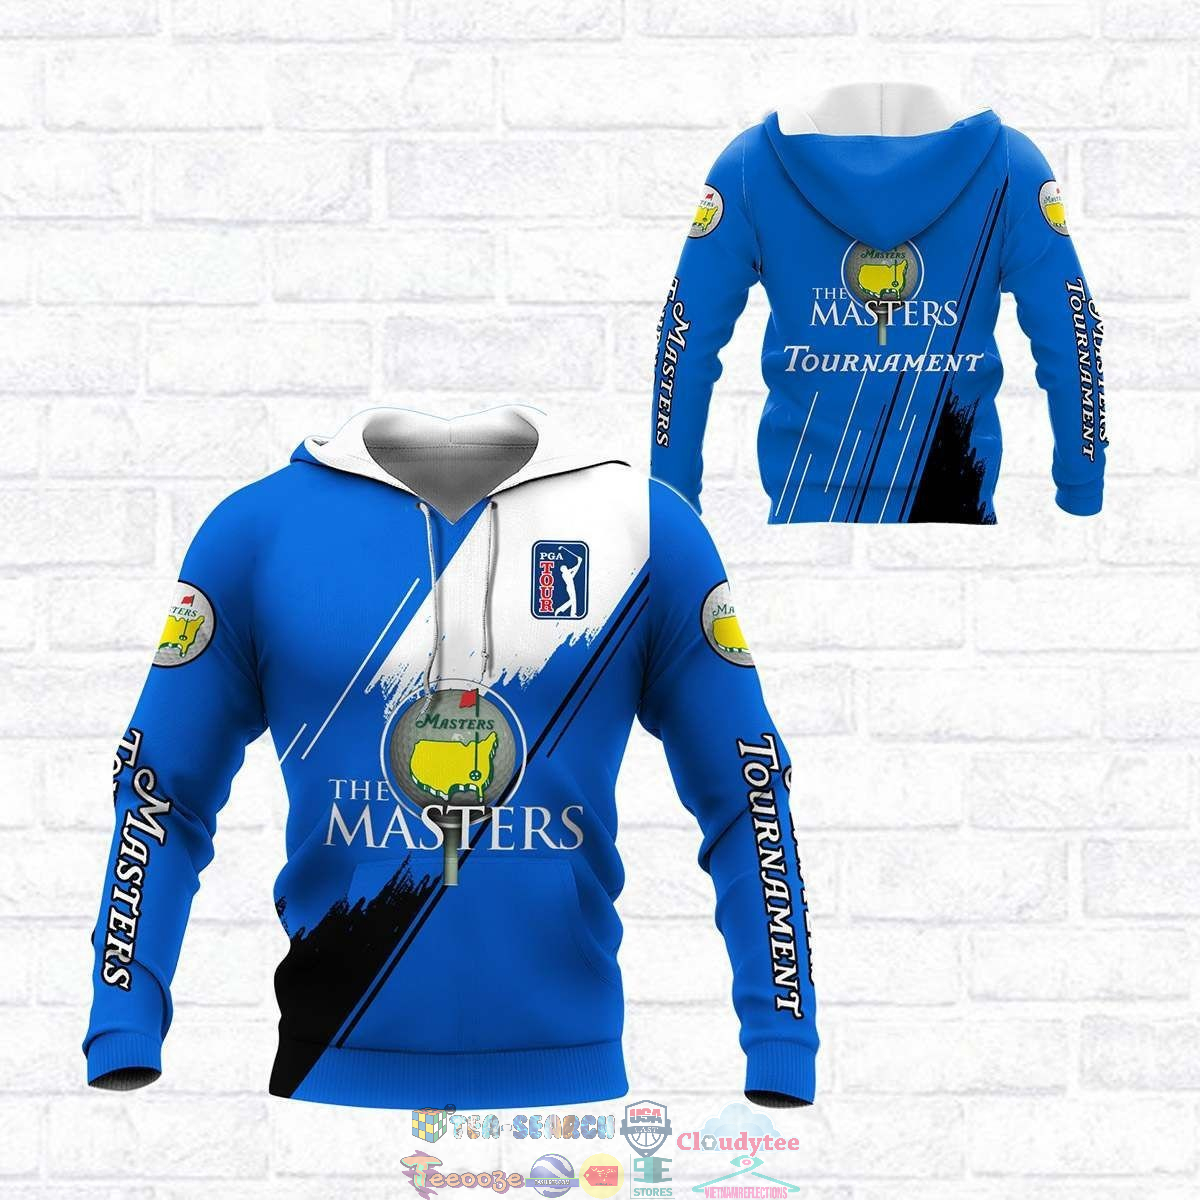 soLOr6xU-TH090822-39xxxThe-Masters-Tournament-Blue-3D-hoodie-and-t-shirt3.jpg